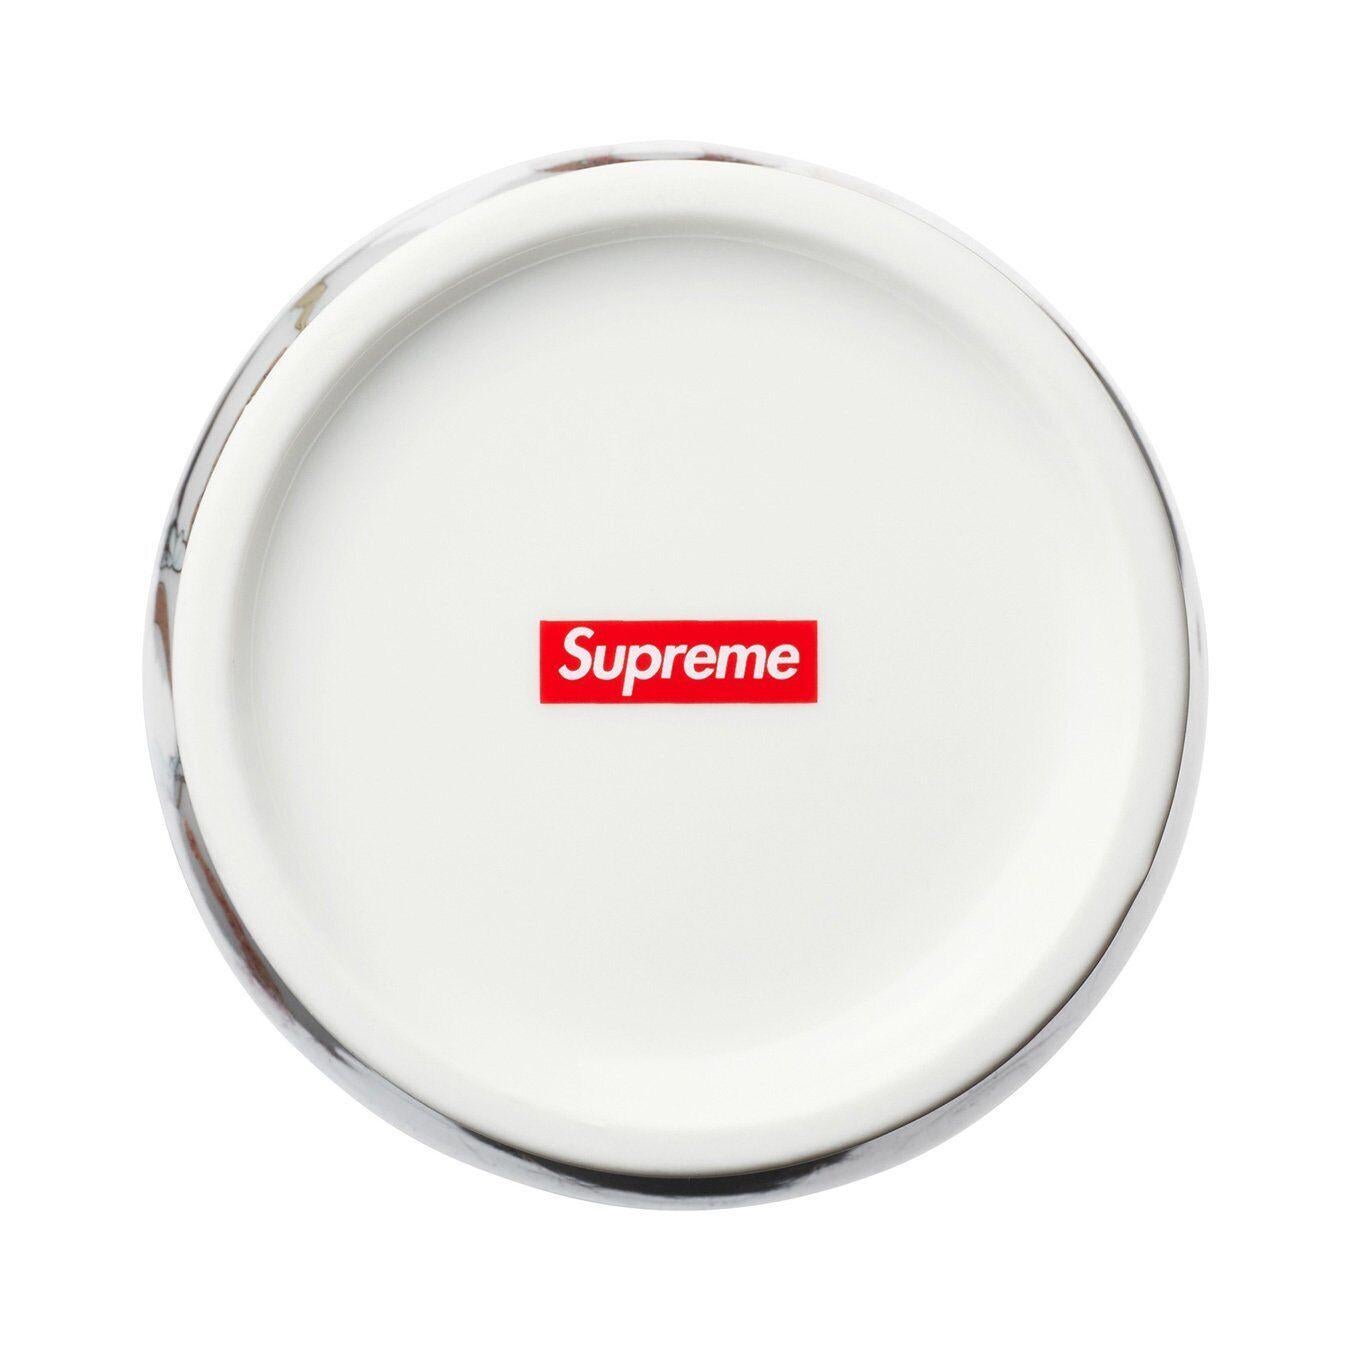 A rare discontinued Ceramic Vase from Supreme's 2018 Release Schedule.

The Supreme Alphabet Vase White is a stylish and functional home decor item that is perfect for any Supreme fan. Made from high-quality ceramic, this vase features the iconic